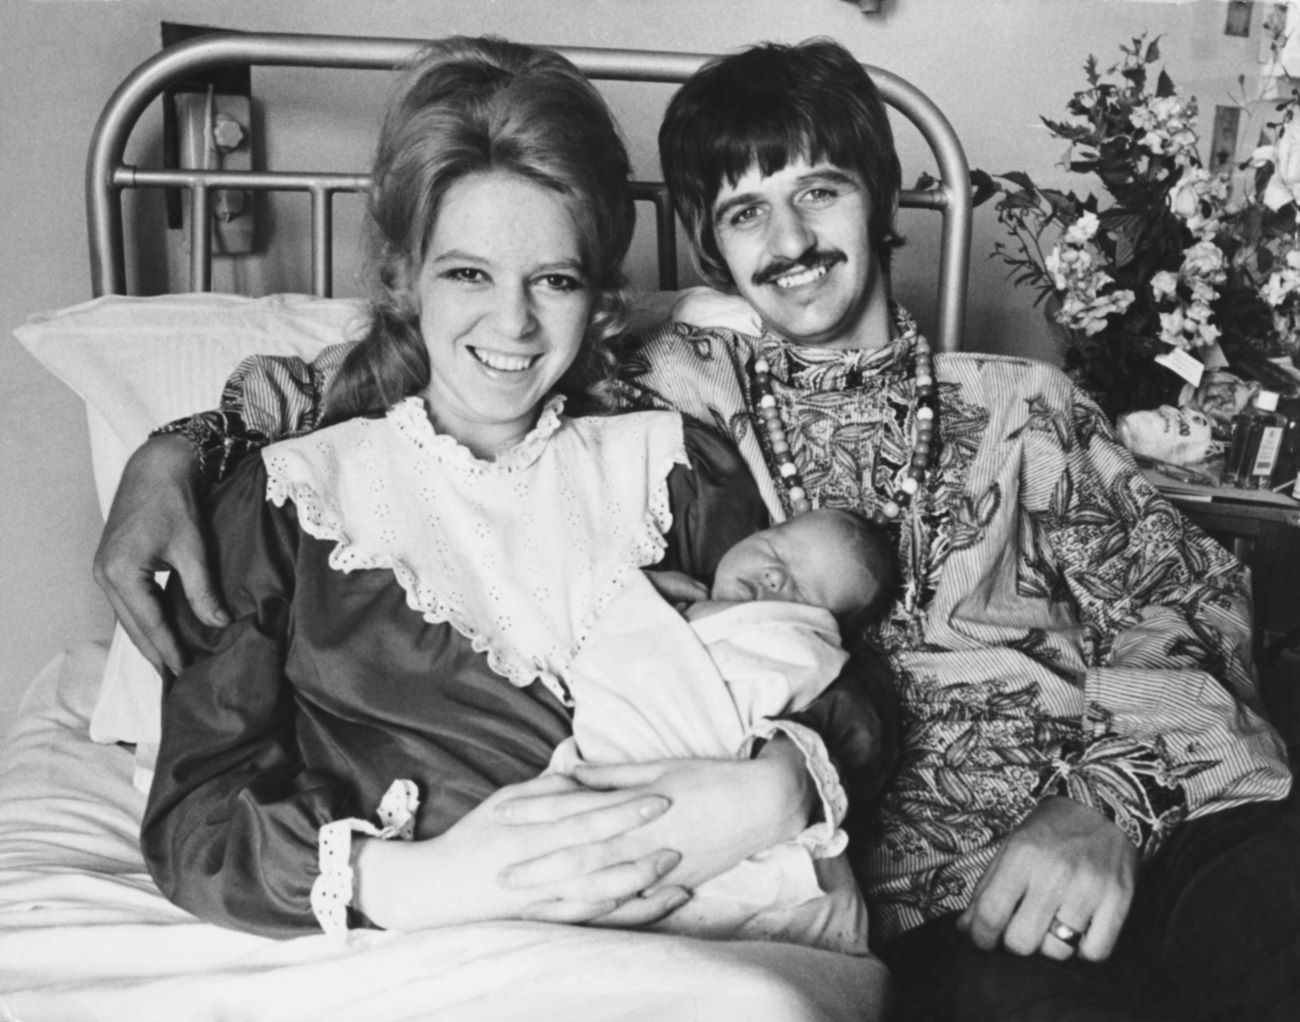 A black and white picture of Maureen Starkey and Ringo Starr sitting in a bed holding their infant son, Jason Starkey.